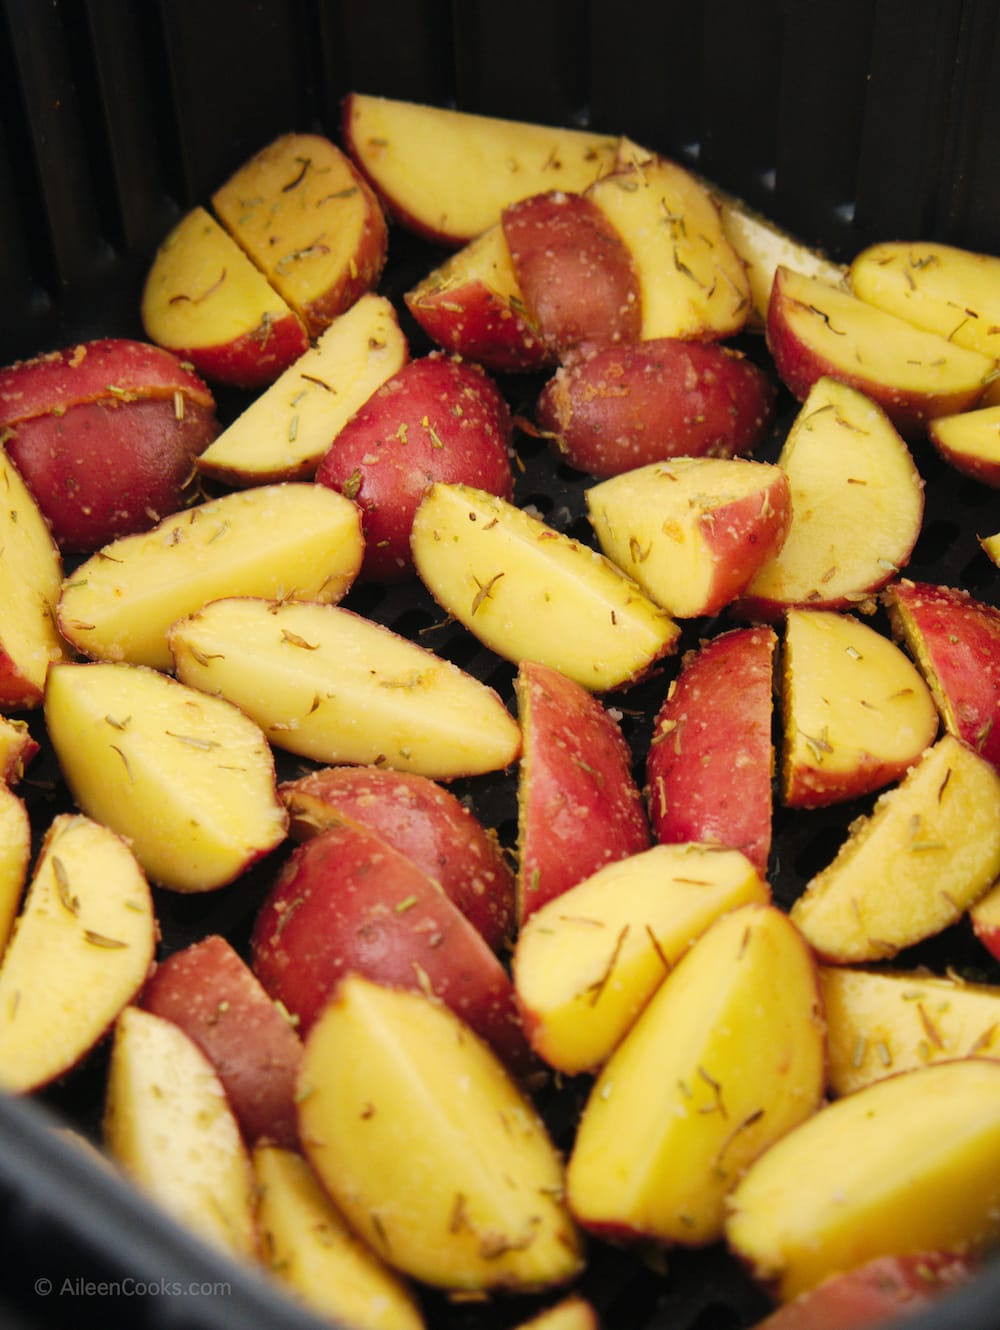 Quartered red potatoes coated in dried rosemary.